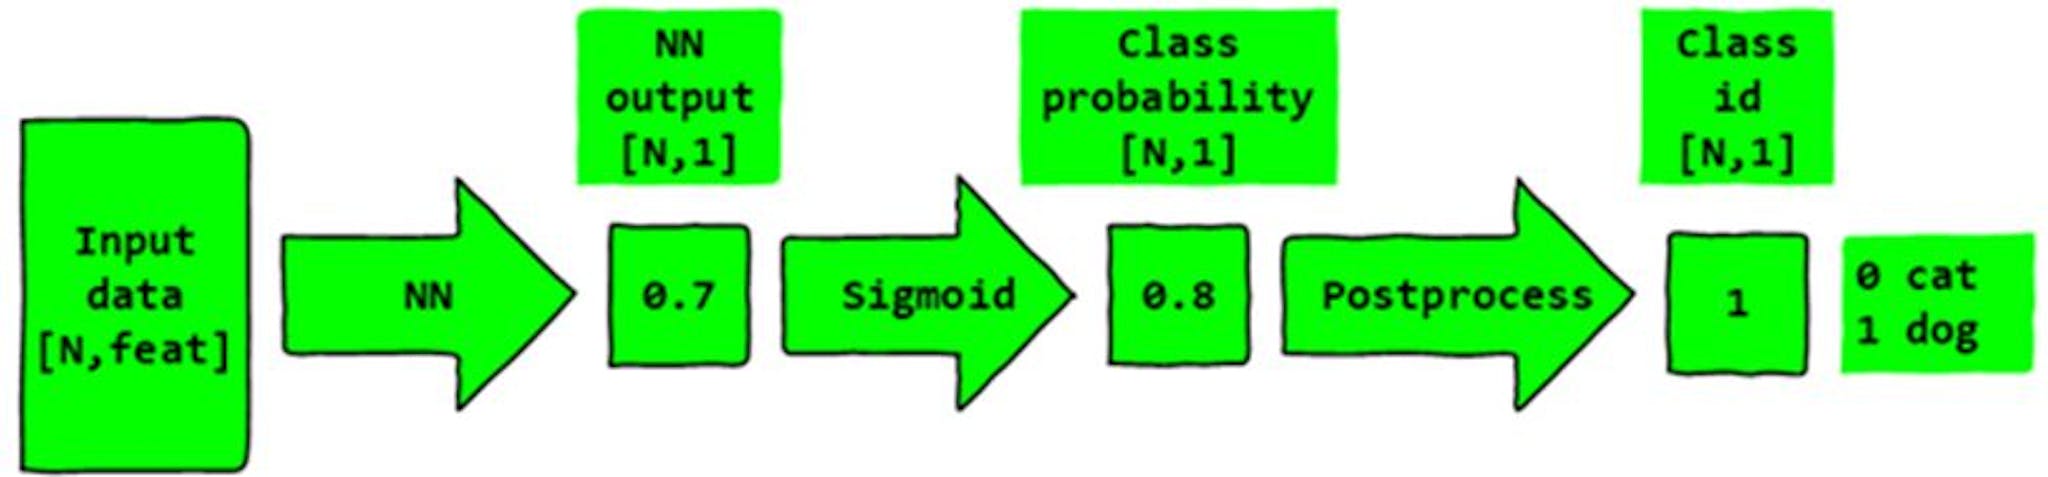 Class prediction with a binary classification NN